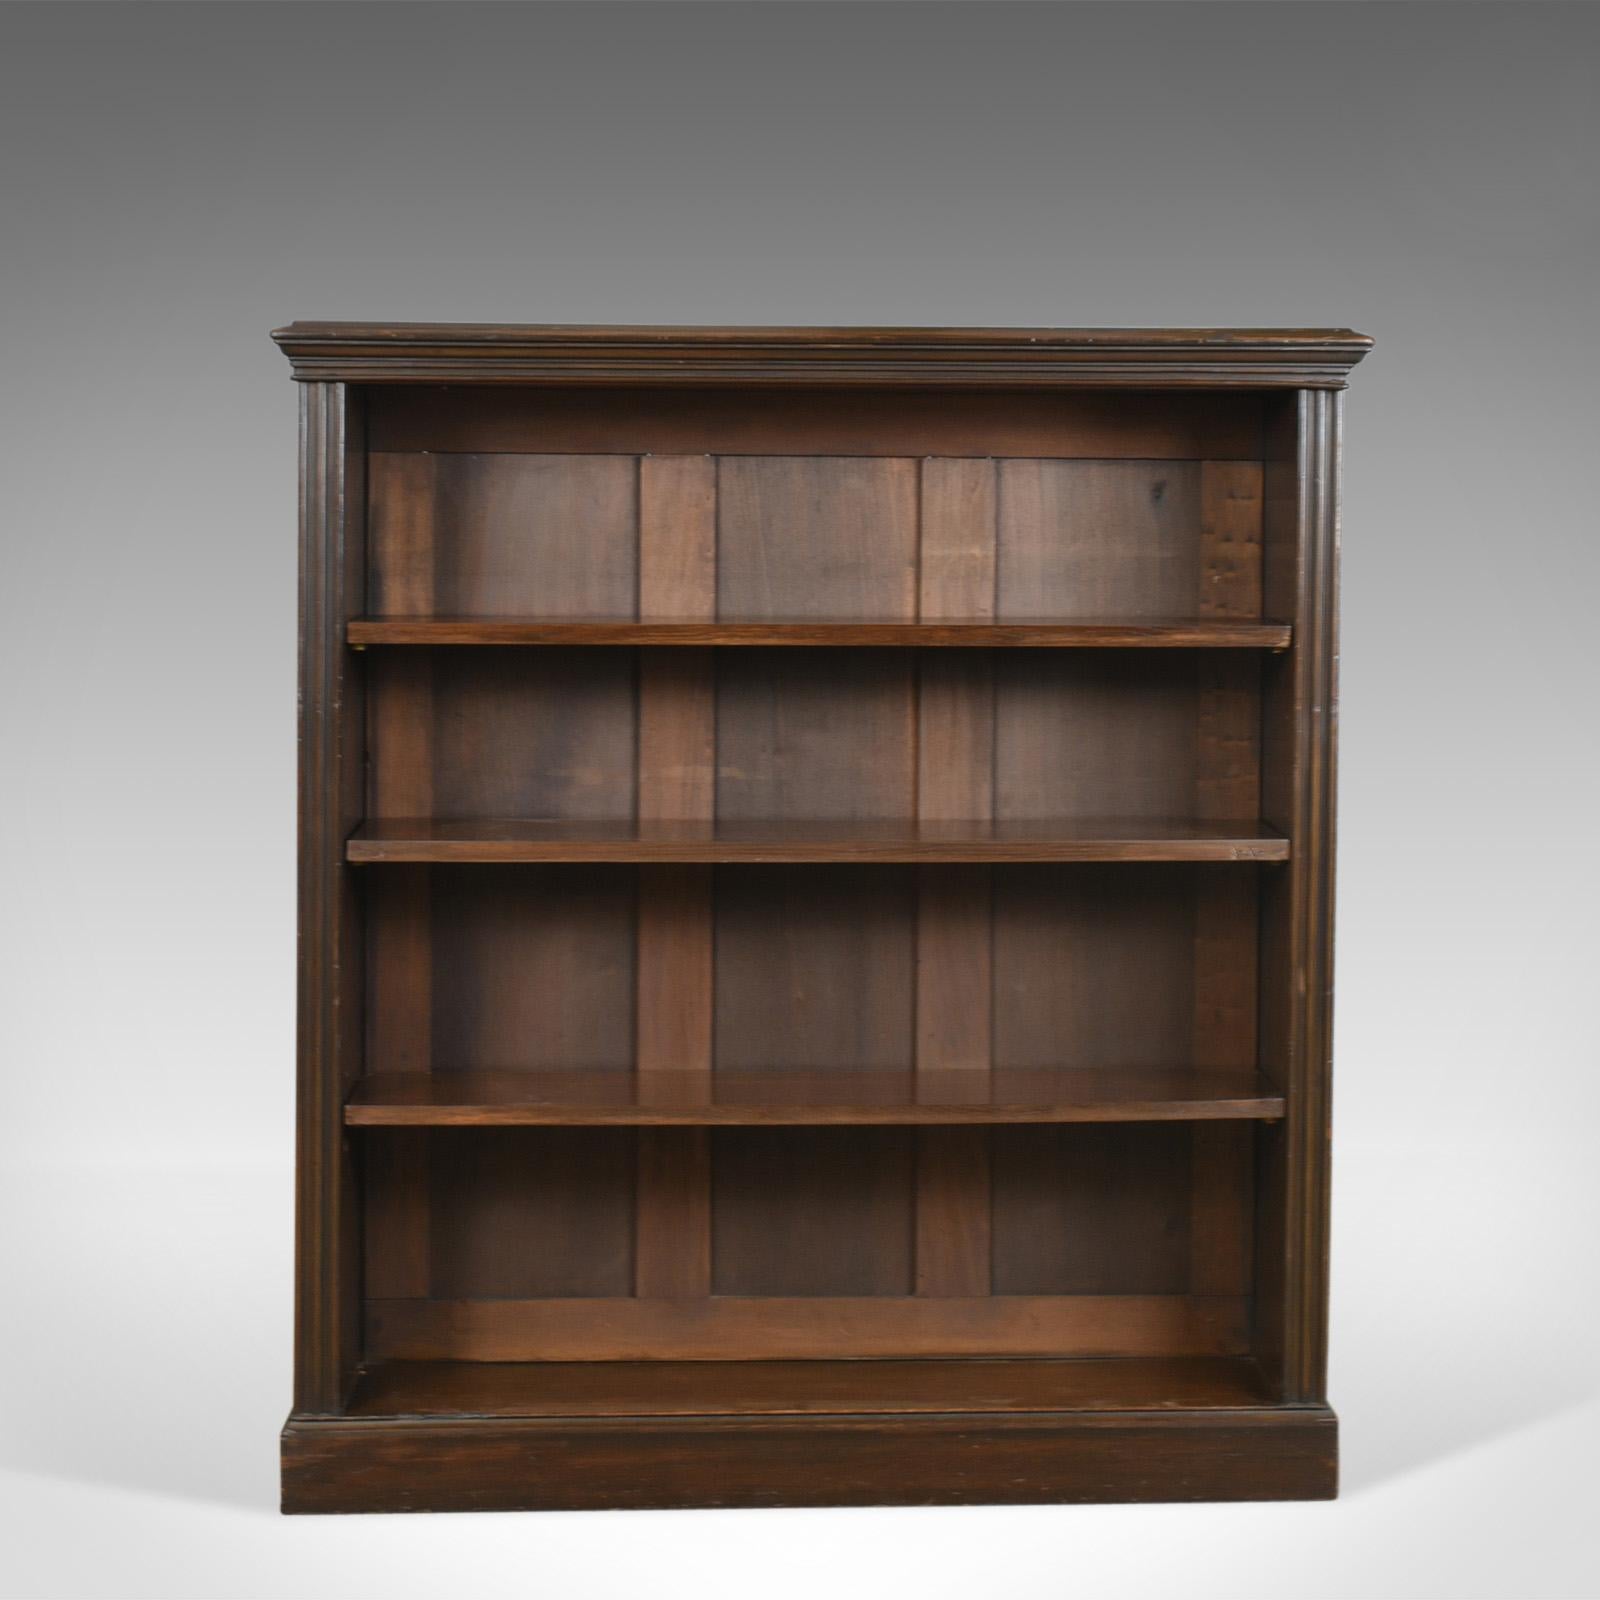 This is an antique open bookcase, an English, Victorian set of book shelves in oak and dating to the late 19th century circa 1890.

Midsize and practical offering abundant shelf space
Appealing dark tones to the English oak
Showing desirable